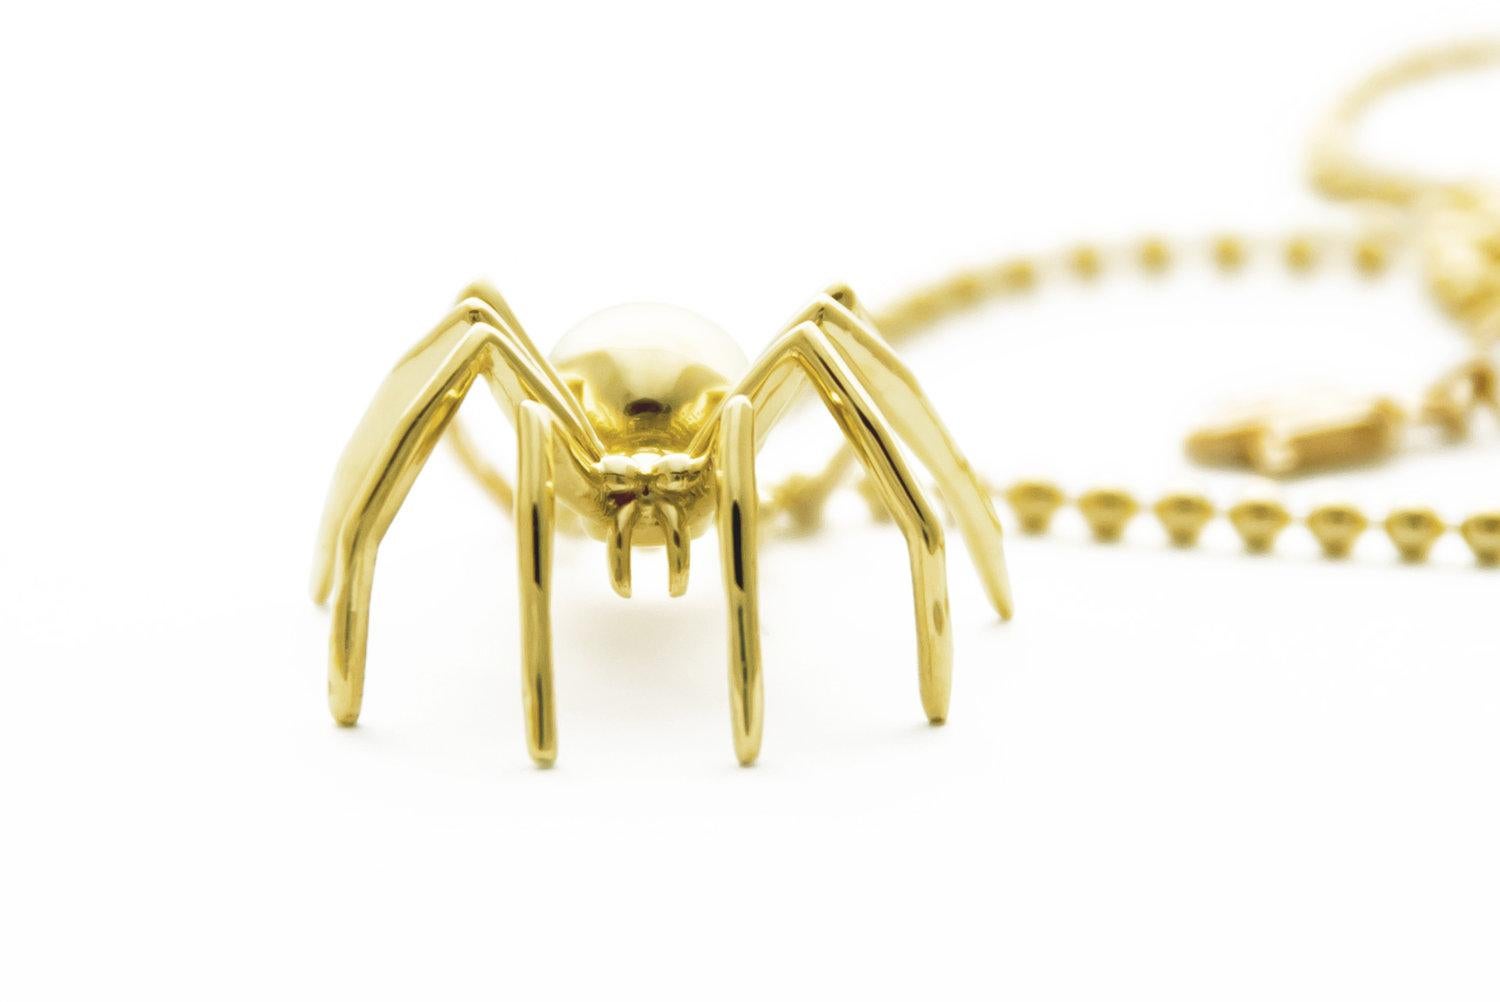 Discover the captivating elegance of the Large Spider Pendant Solid Yellow Gold, a timeless representation of creativity and self-determination. For ages, the spider has stood as a symbol of ingenuity, showcasing its ability to craft its own